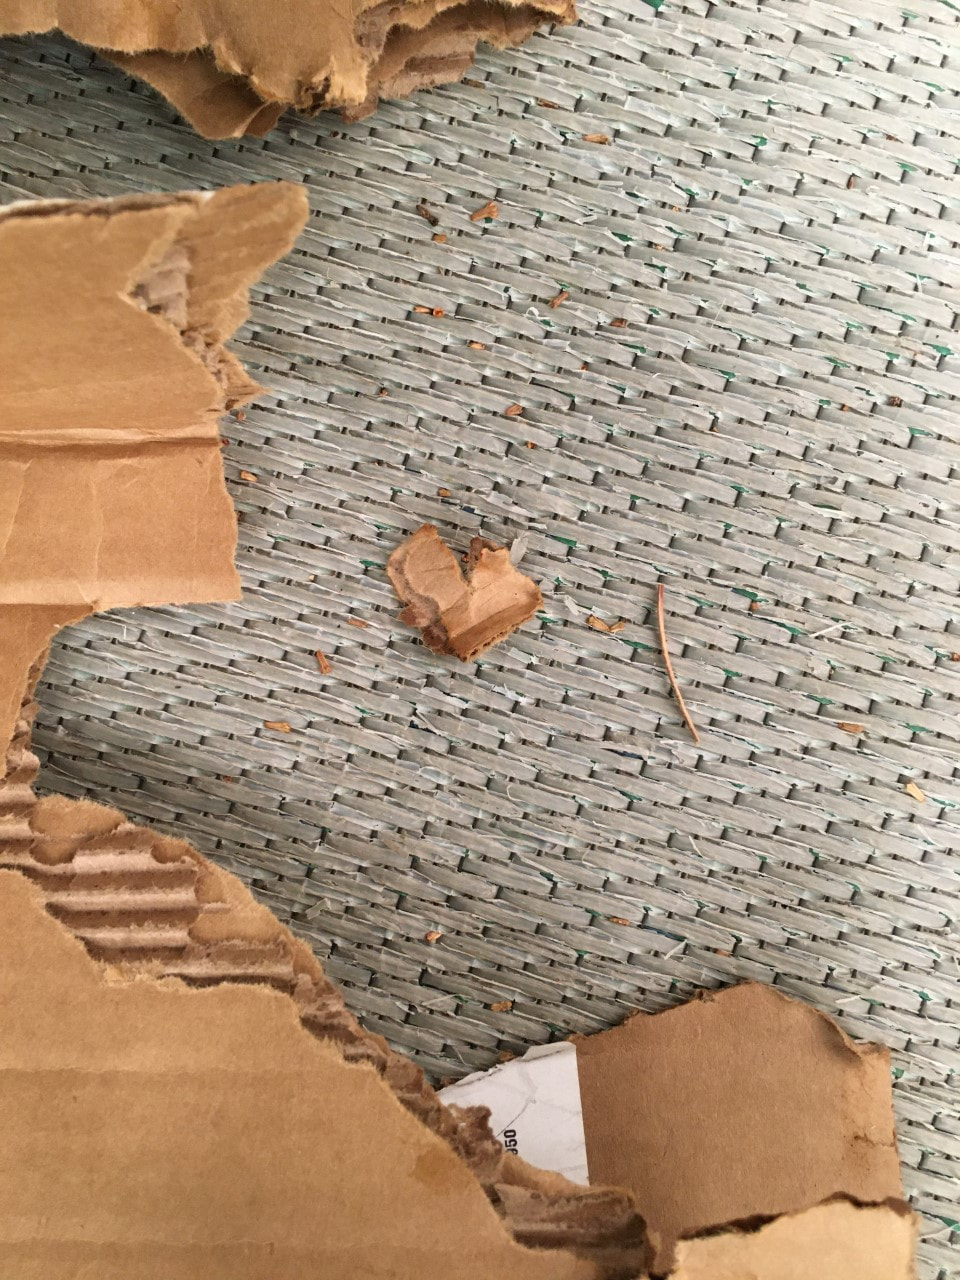 Grey mat in the background, a brown box torn up with pieces scattered with a heart from one of the torn pieces. 